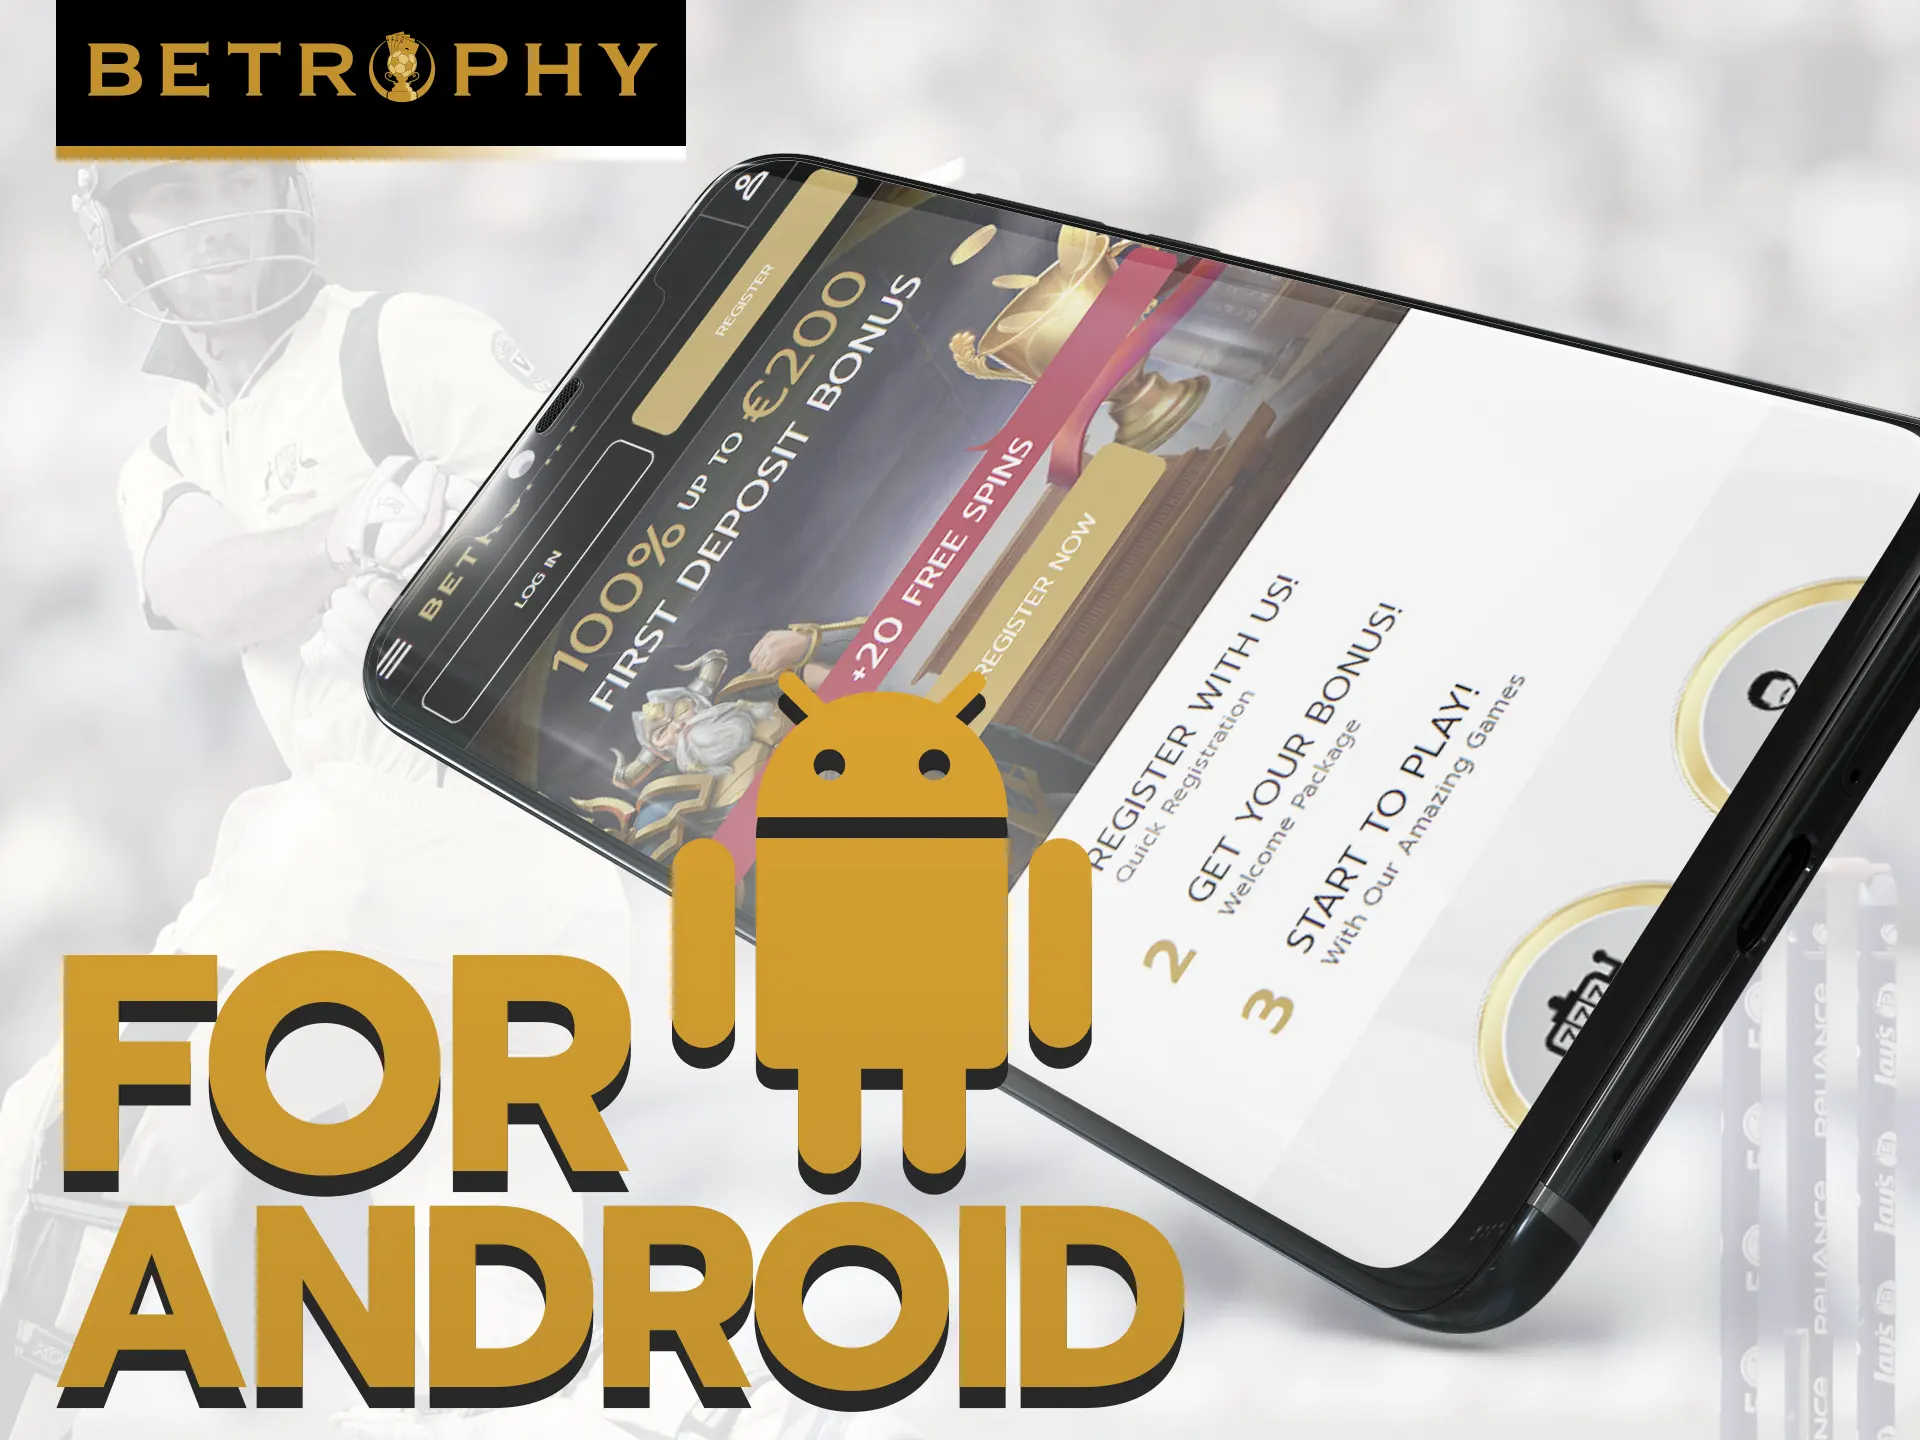 Bet anywhere on your Android phone with Betrophy.